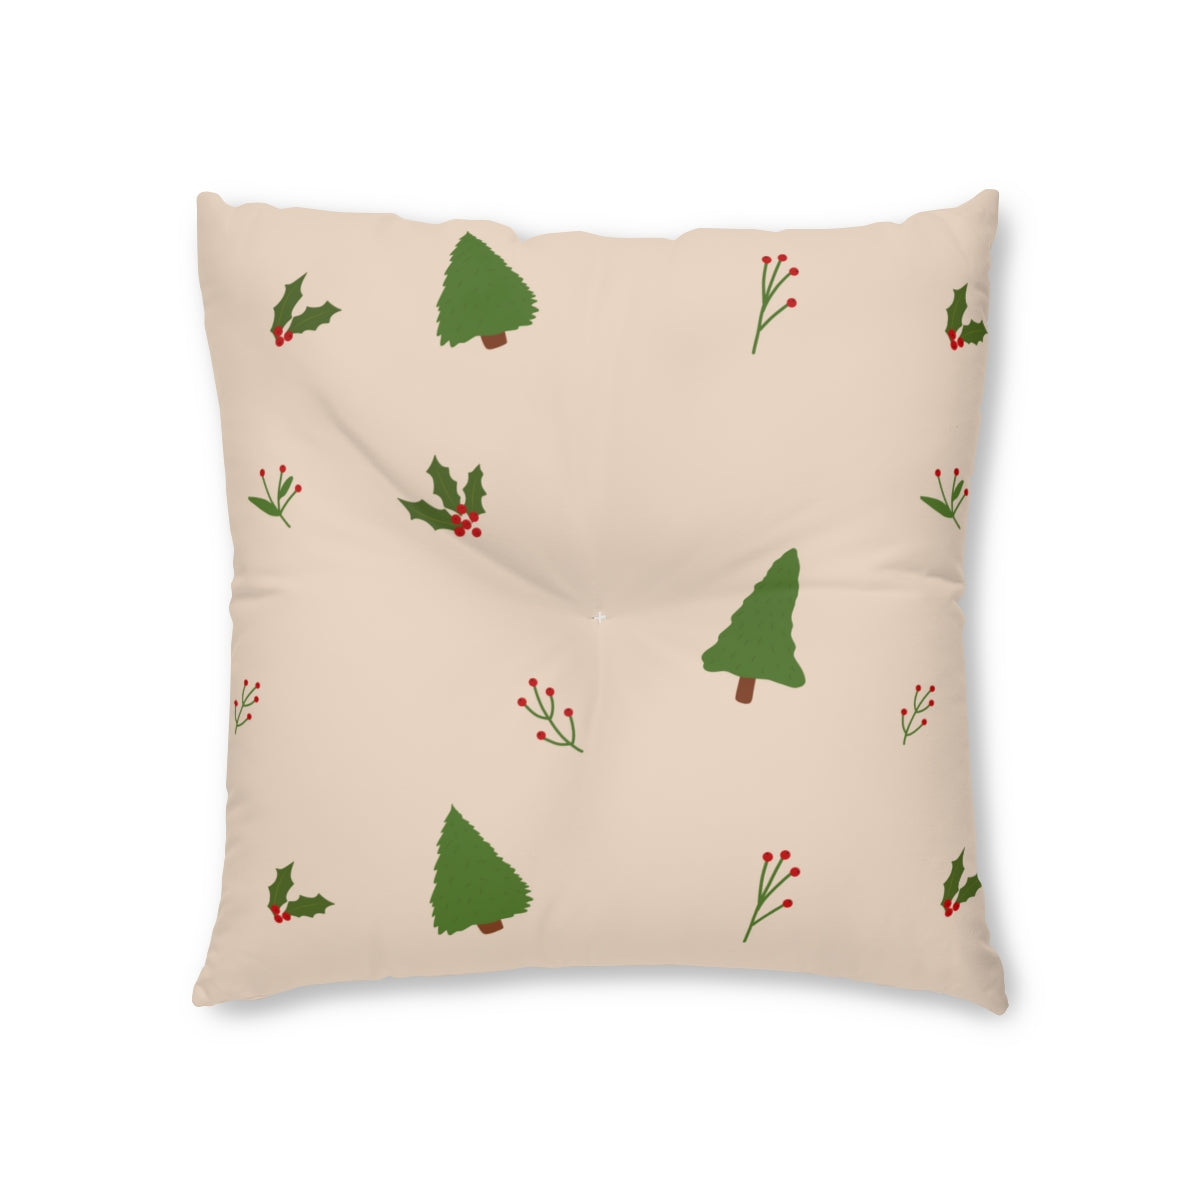 Lifestyle Details - Beige Square Tufted Holiday Floor Pillow - Evergreen Trees & Holly - 26x26 - Front View